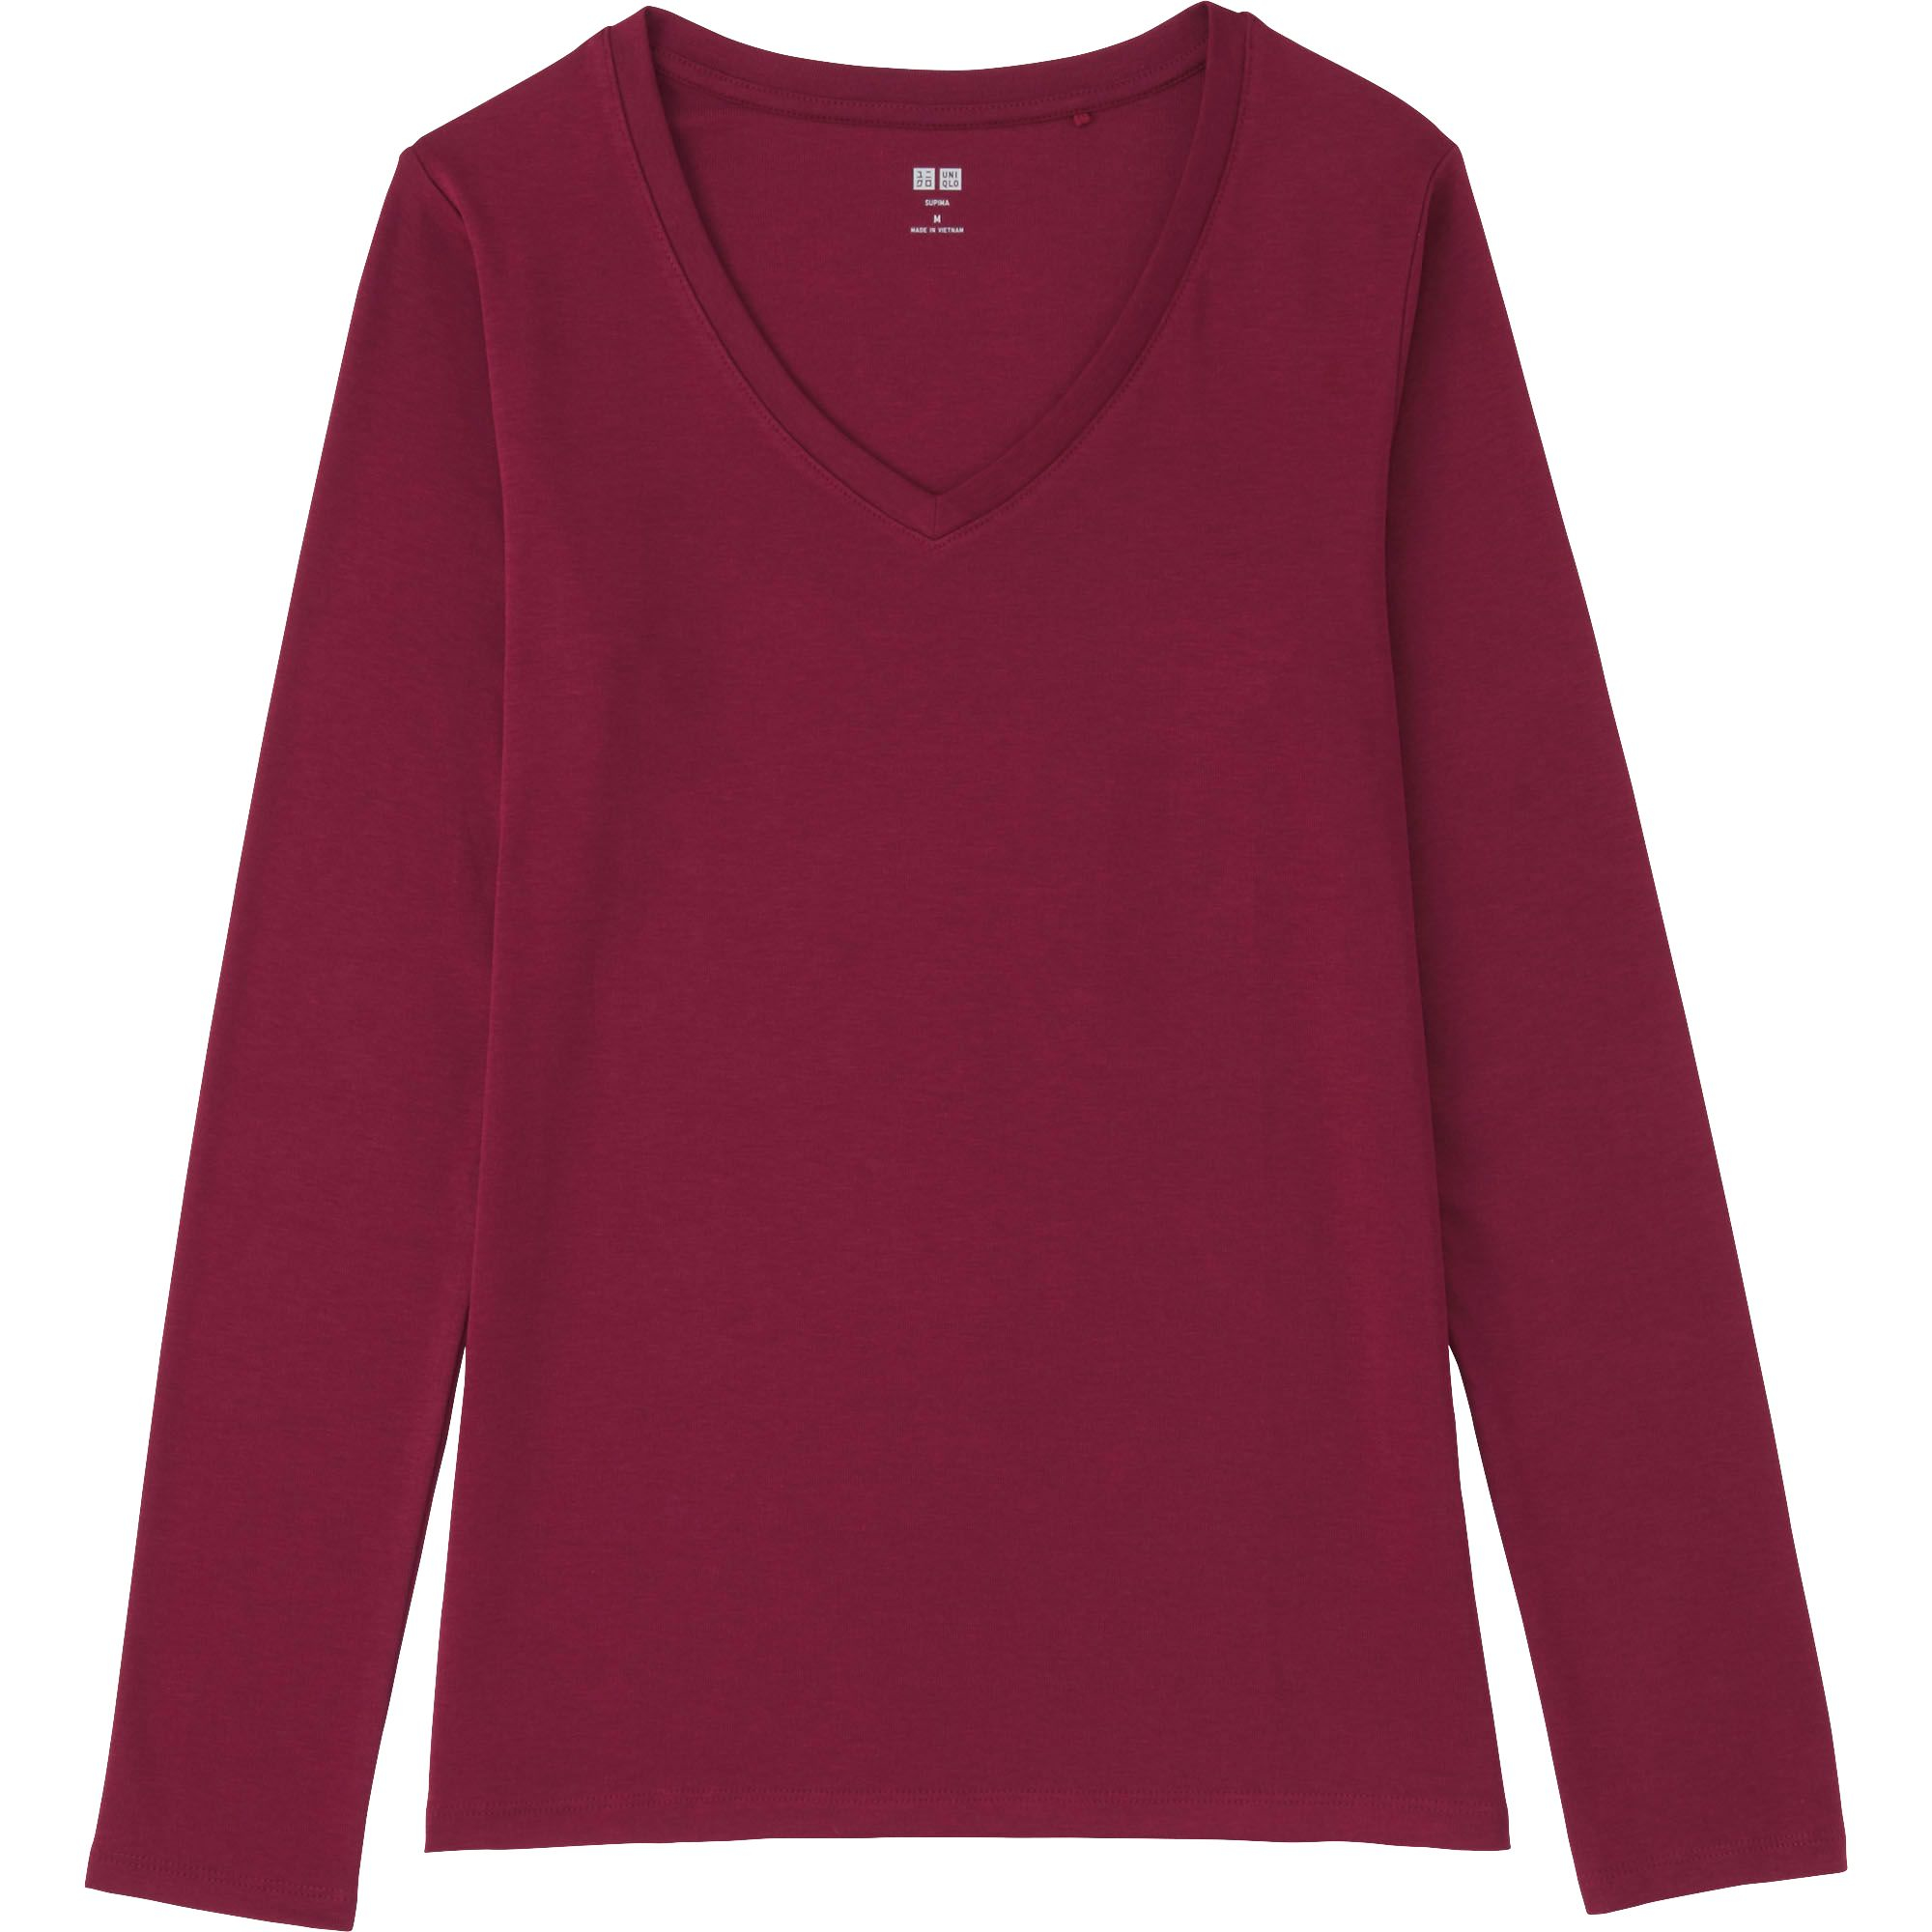 Uniqlo Women Supima Cotton Modal V-Neck Long Sleeve T-Shirt in Red ...